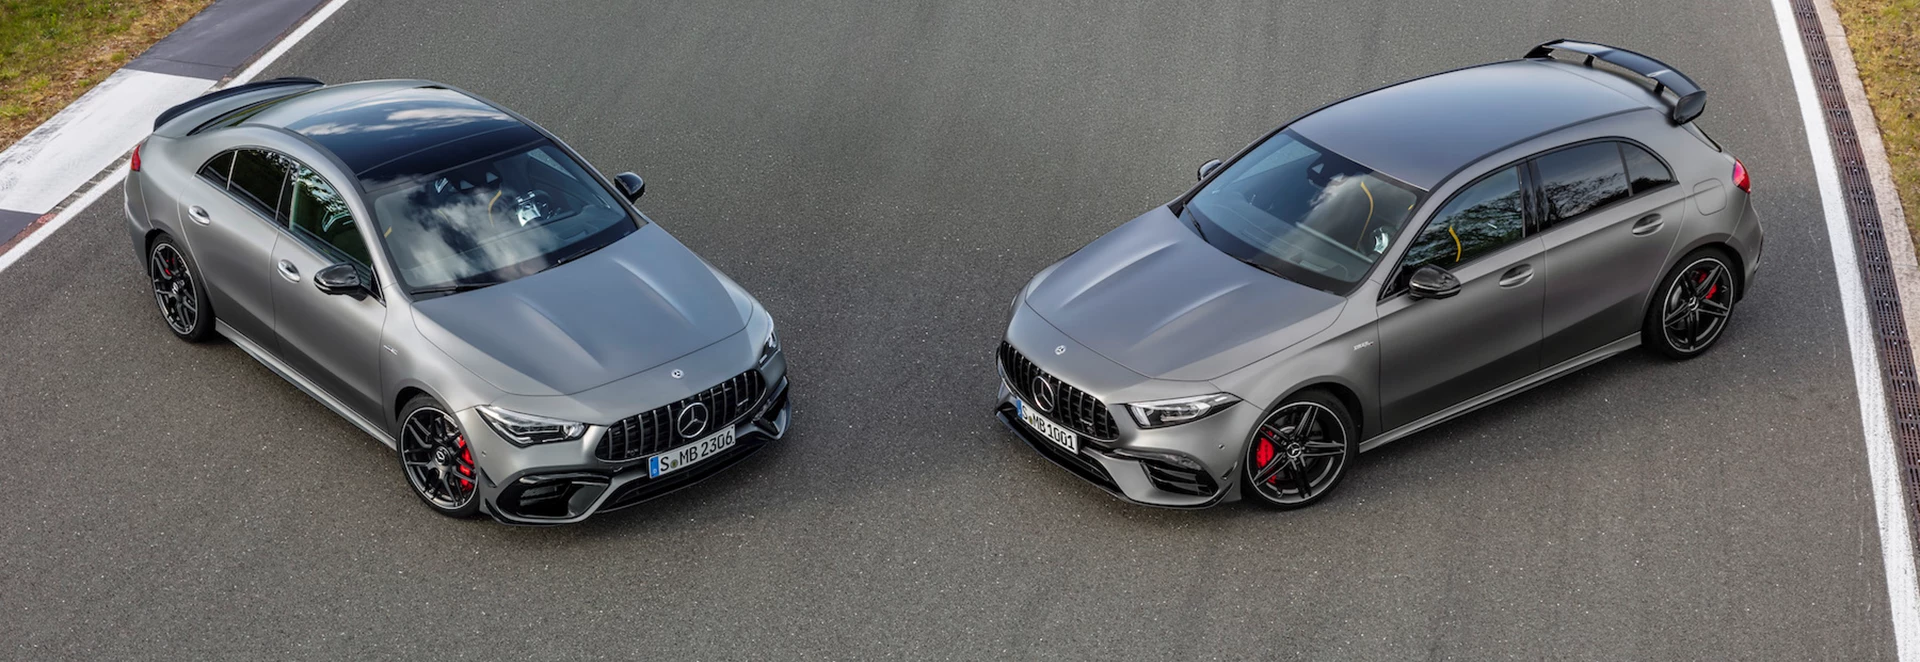 Mercedes-AMG announces pricing for performance-oriented A 45 S and CLA 45 S